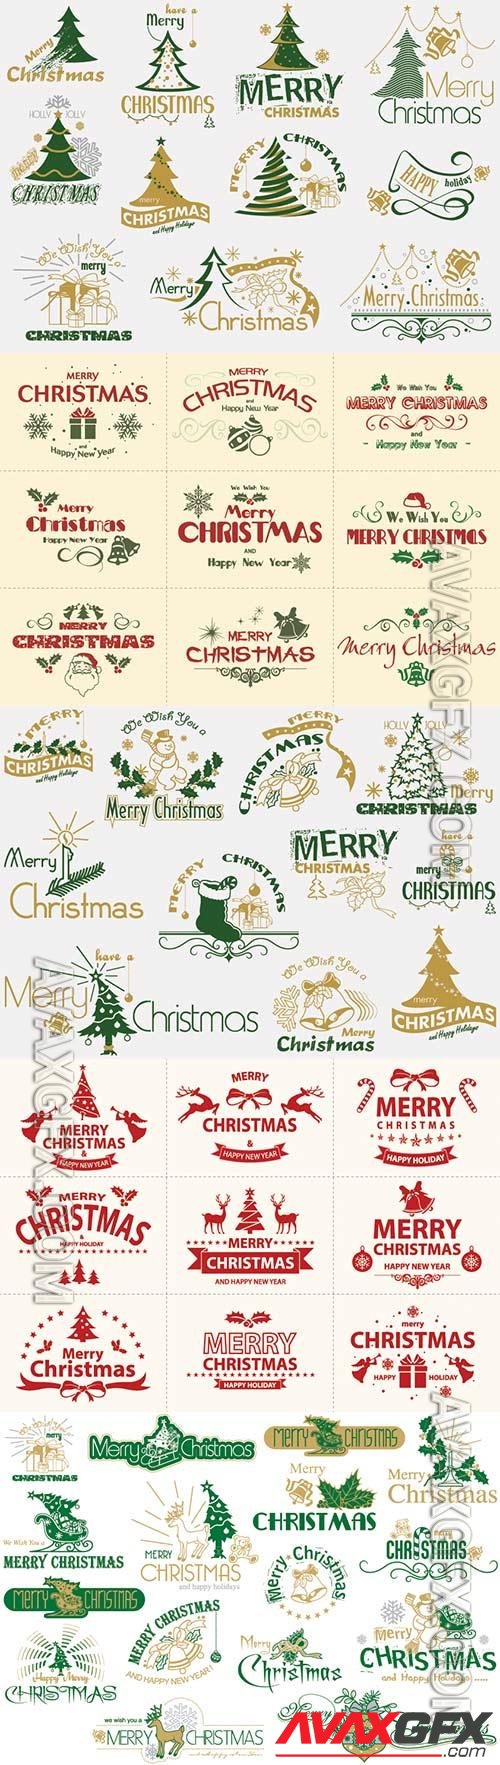 Christmas calligraphic elements, decorative new year icons and lettering in vector